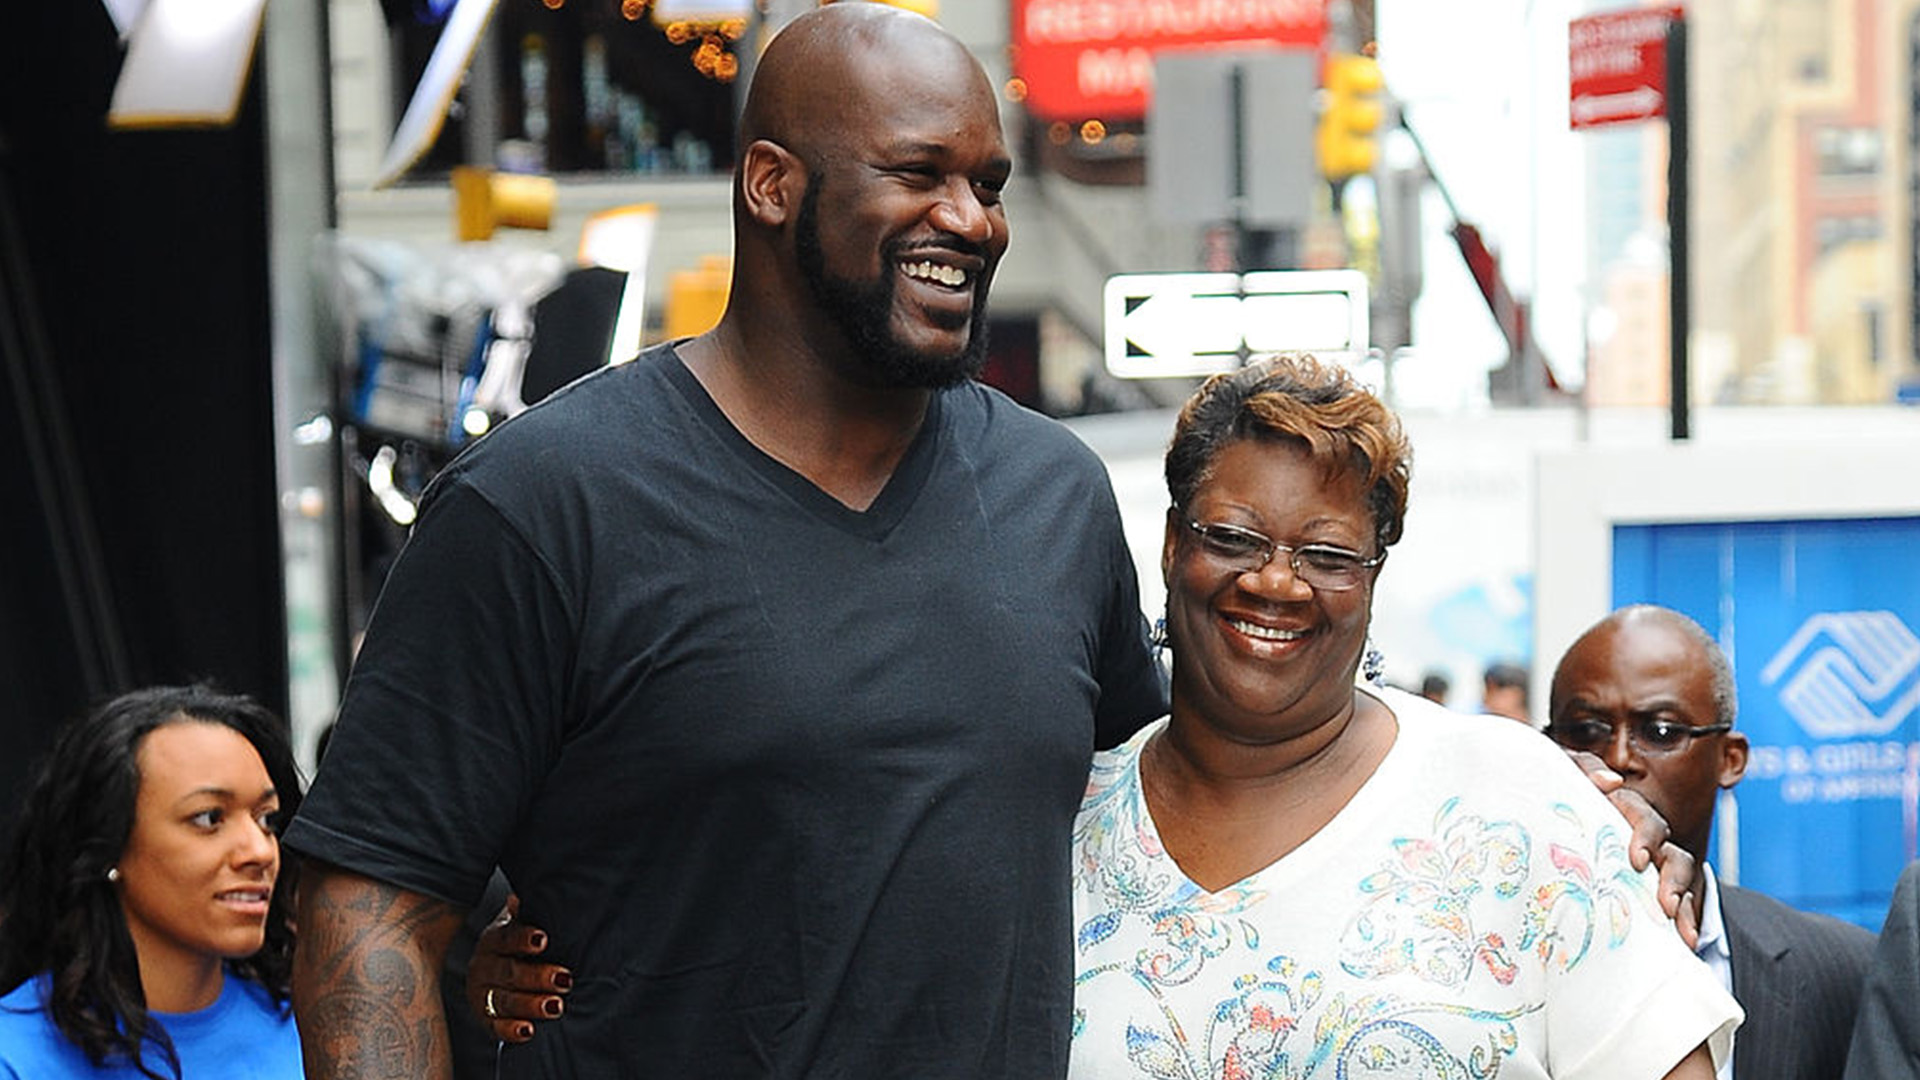 Shaquille O'Neal's Recalls Why He Didn't Enter The NBA Sooner — "Momma said, 'You're Not Ready, Baby'"